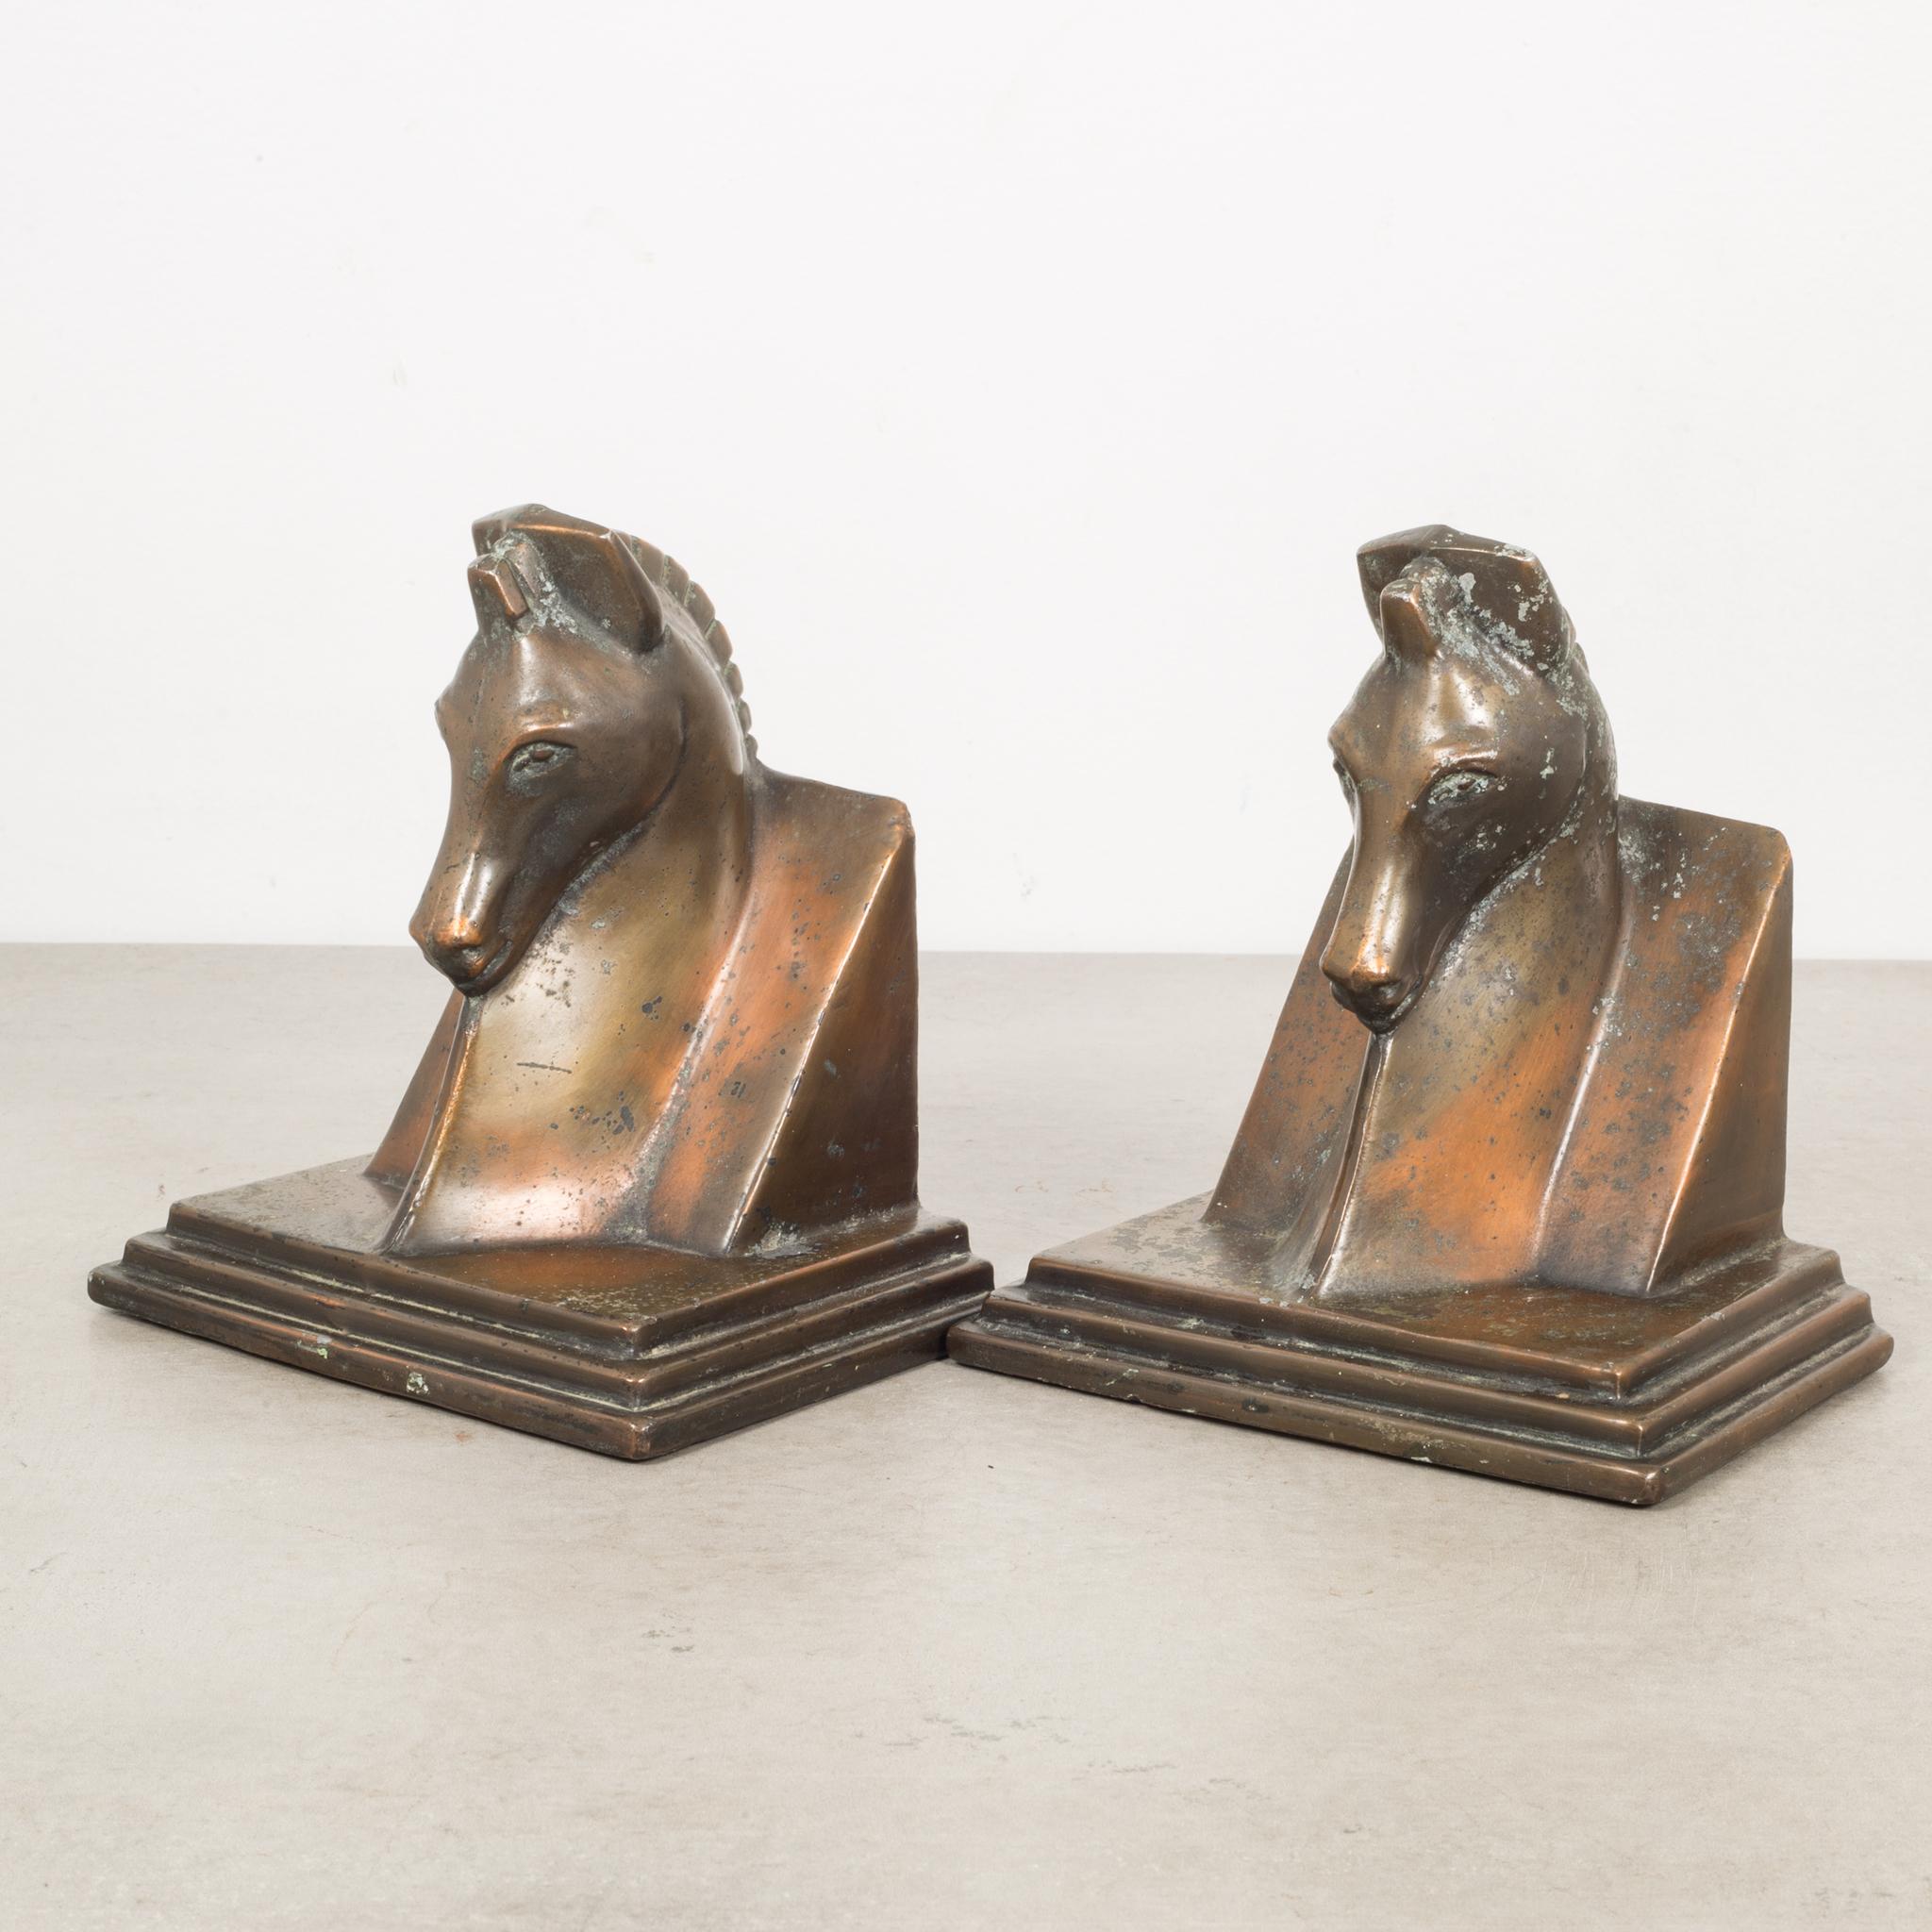 About:

This is a pair of Art Deco bronze-plated horse bookends with the original felt on the bottom. Both bookends are in good condition and have retained their bronze finish and have the appropriate patina consistent with age and